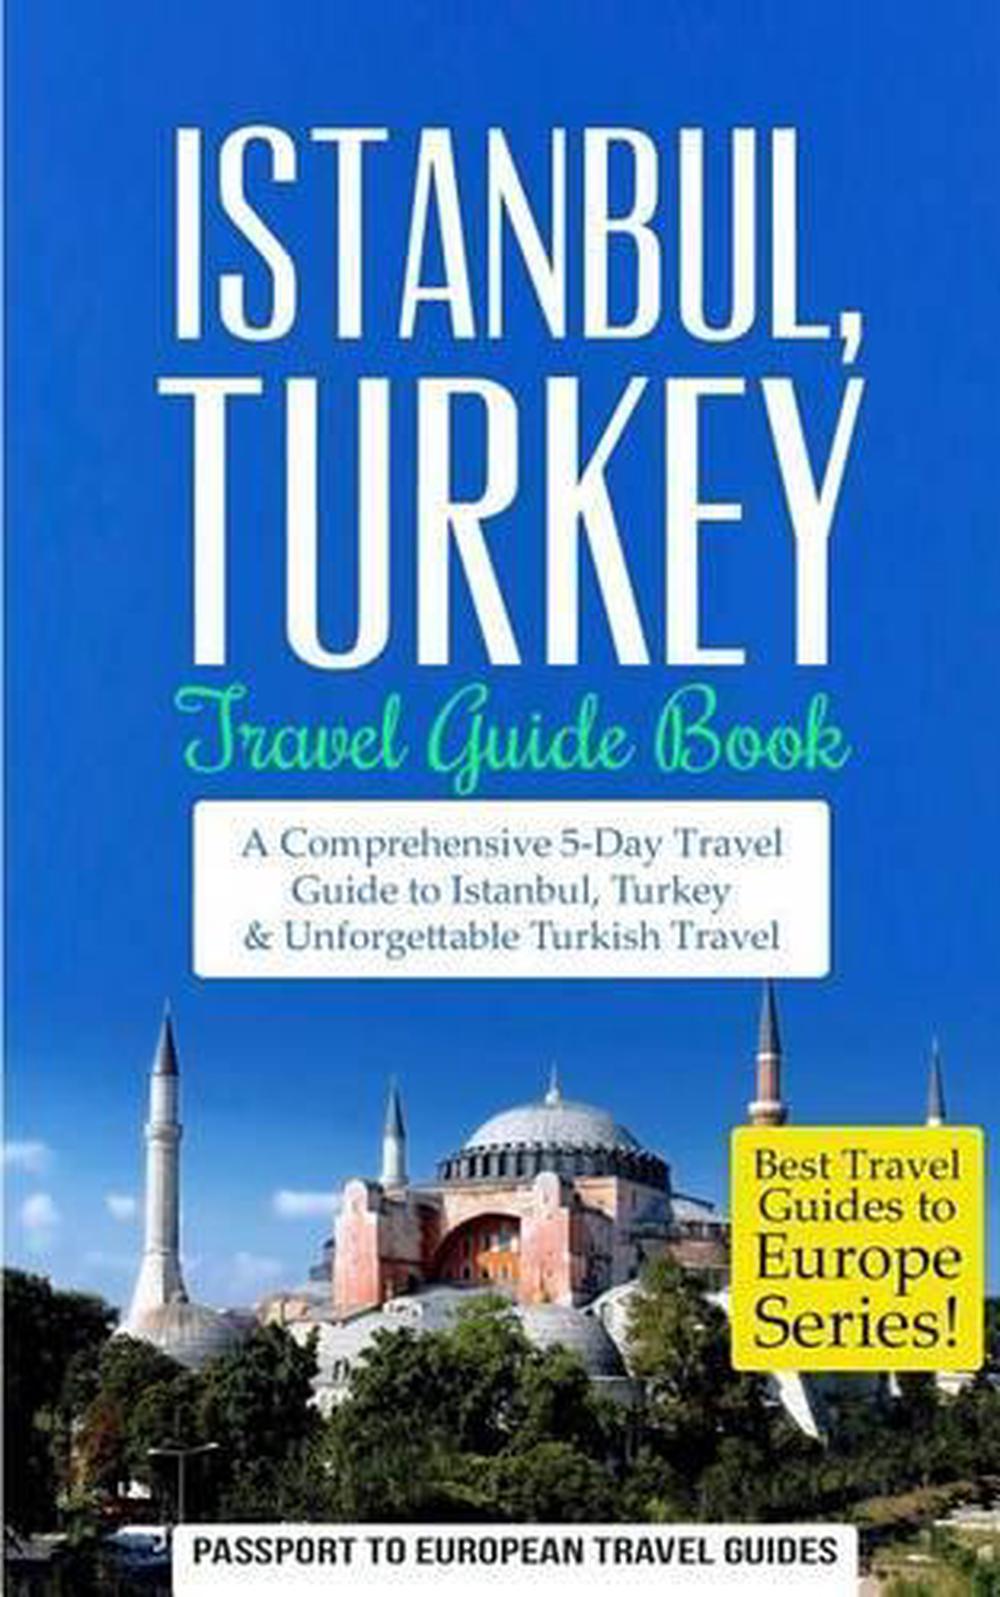 travel book for istanbul